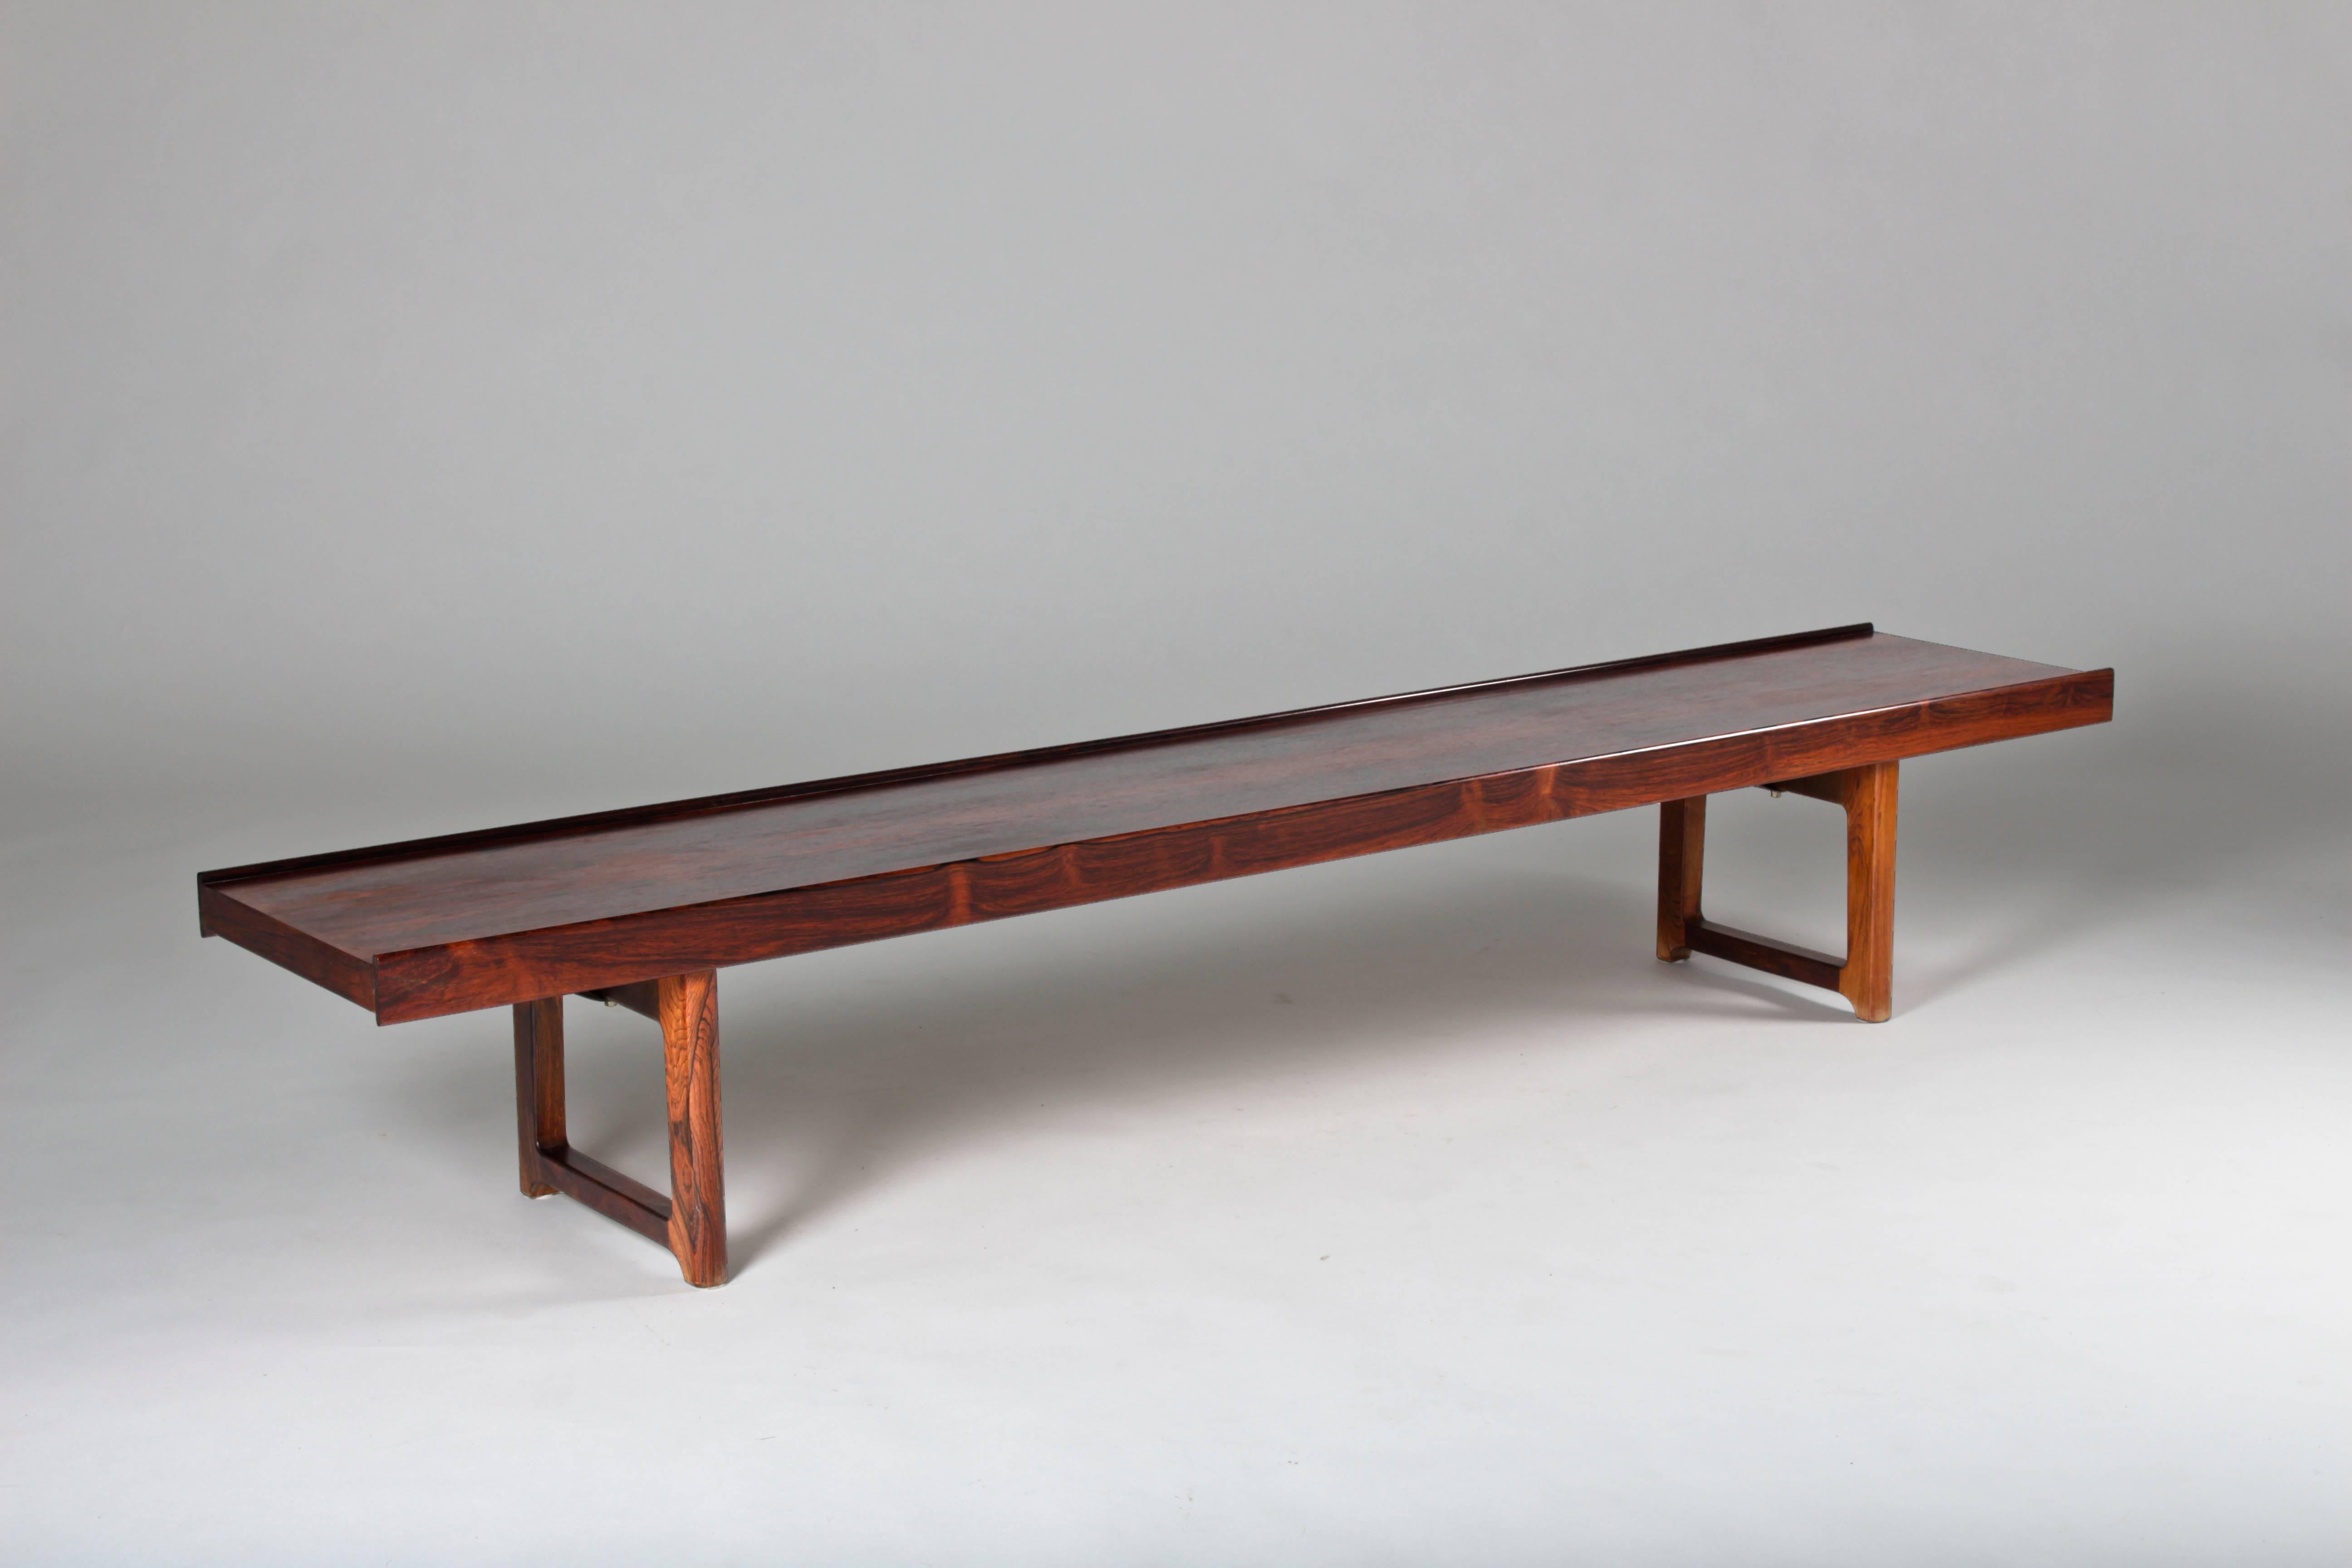 Krobo bench by Torbjørn Afdal in dark rosewood. This bench was covered in a blanket that was attached to the underside by the previous owner. Therefor the surface is in original near mint condition, not even bleached by the sun.
The underside shows